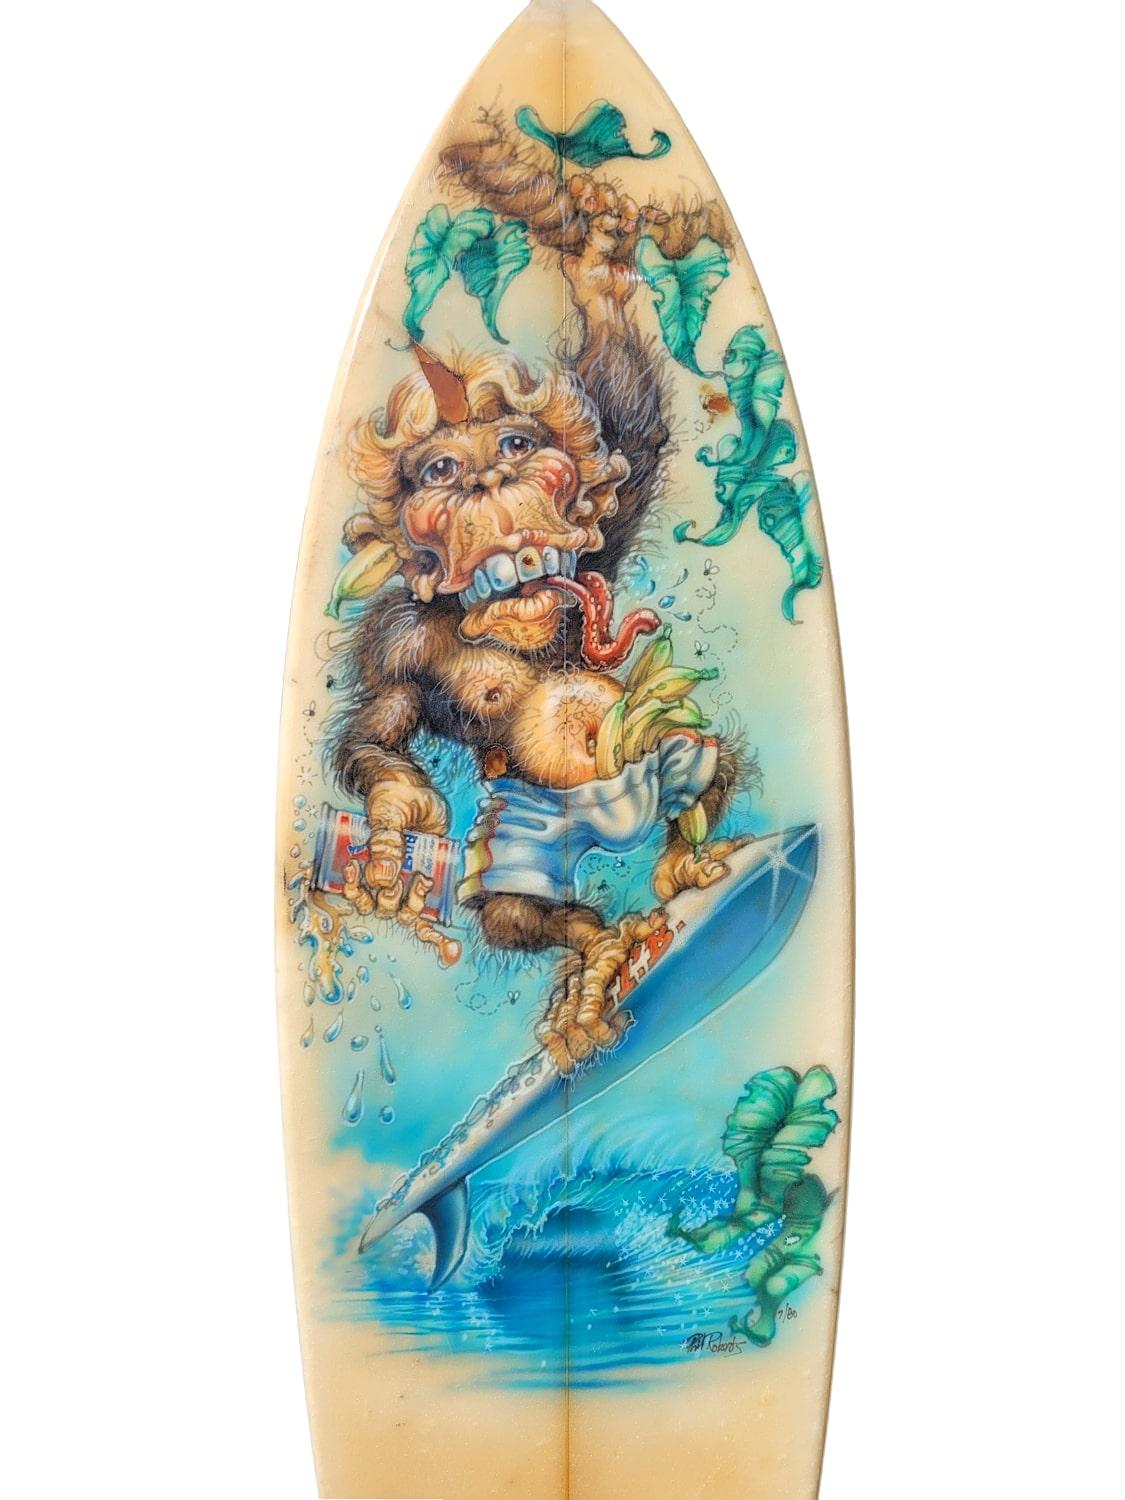 Vintage 1980 MTB ‘Surfing Monkey’ surfboard with mural artwork by the renowned Phil Roberts. Features airbrushed work of art depicting a monkey surfing with a Budweiser beer. Airbrushed in Robert’s signature art style and signed “Phil Roberts 7/80”.